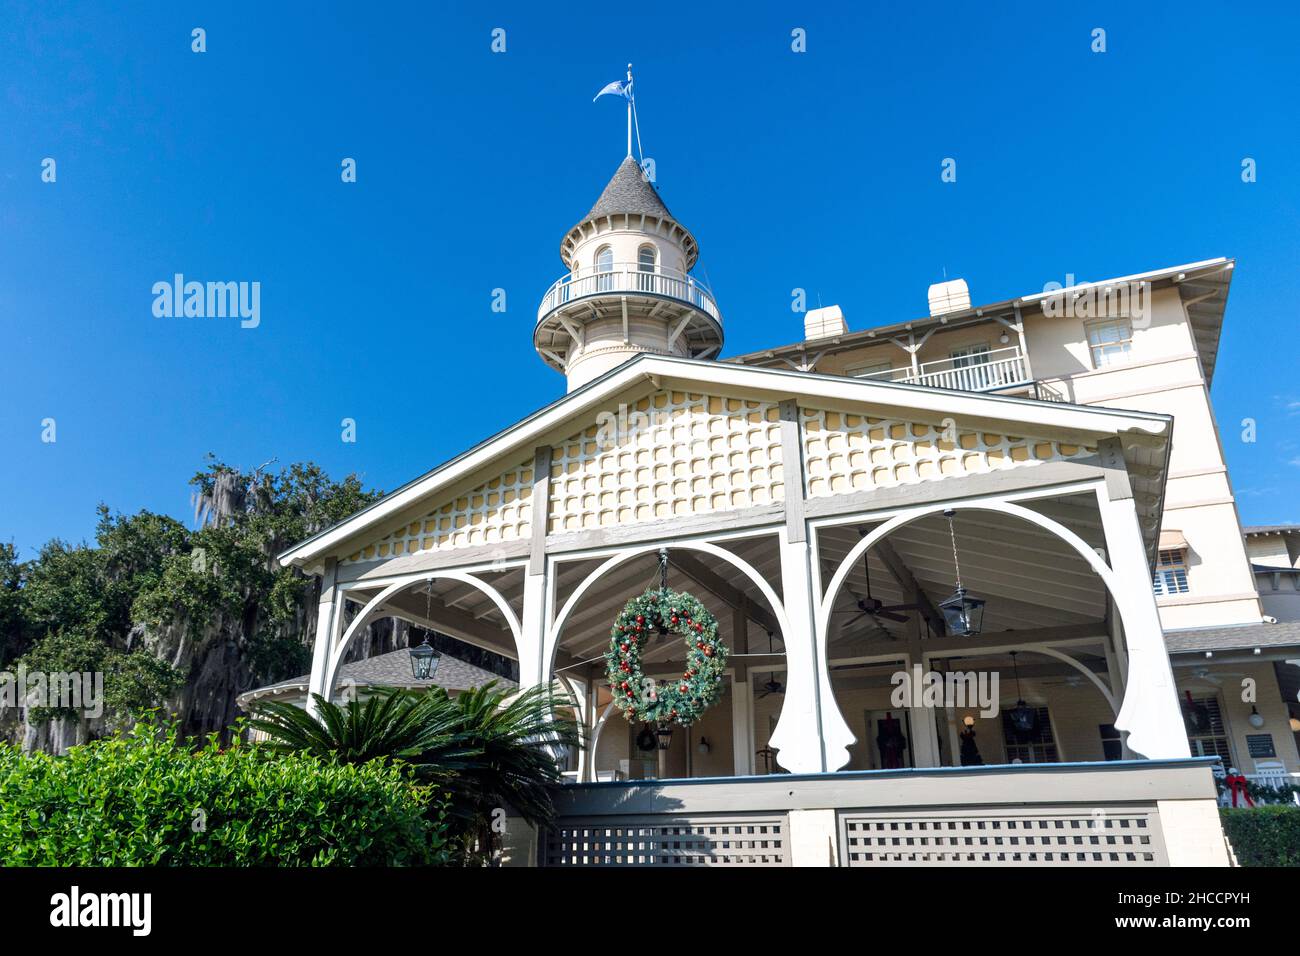 Jekyll Island, Georgia, USA - Dec. 13, 2021: The Jekyll Island Club and Resort is a popular slow travel destination in the southeastern United States. Stock Photo